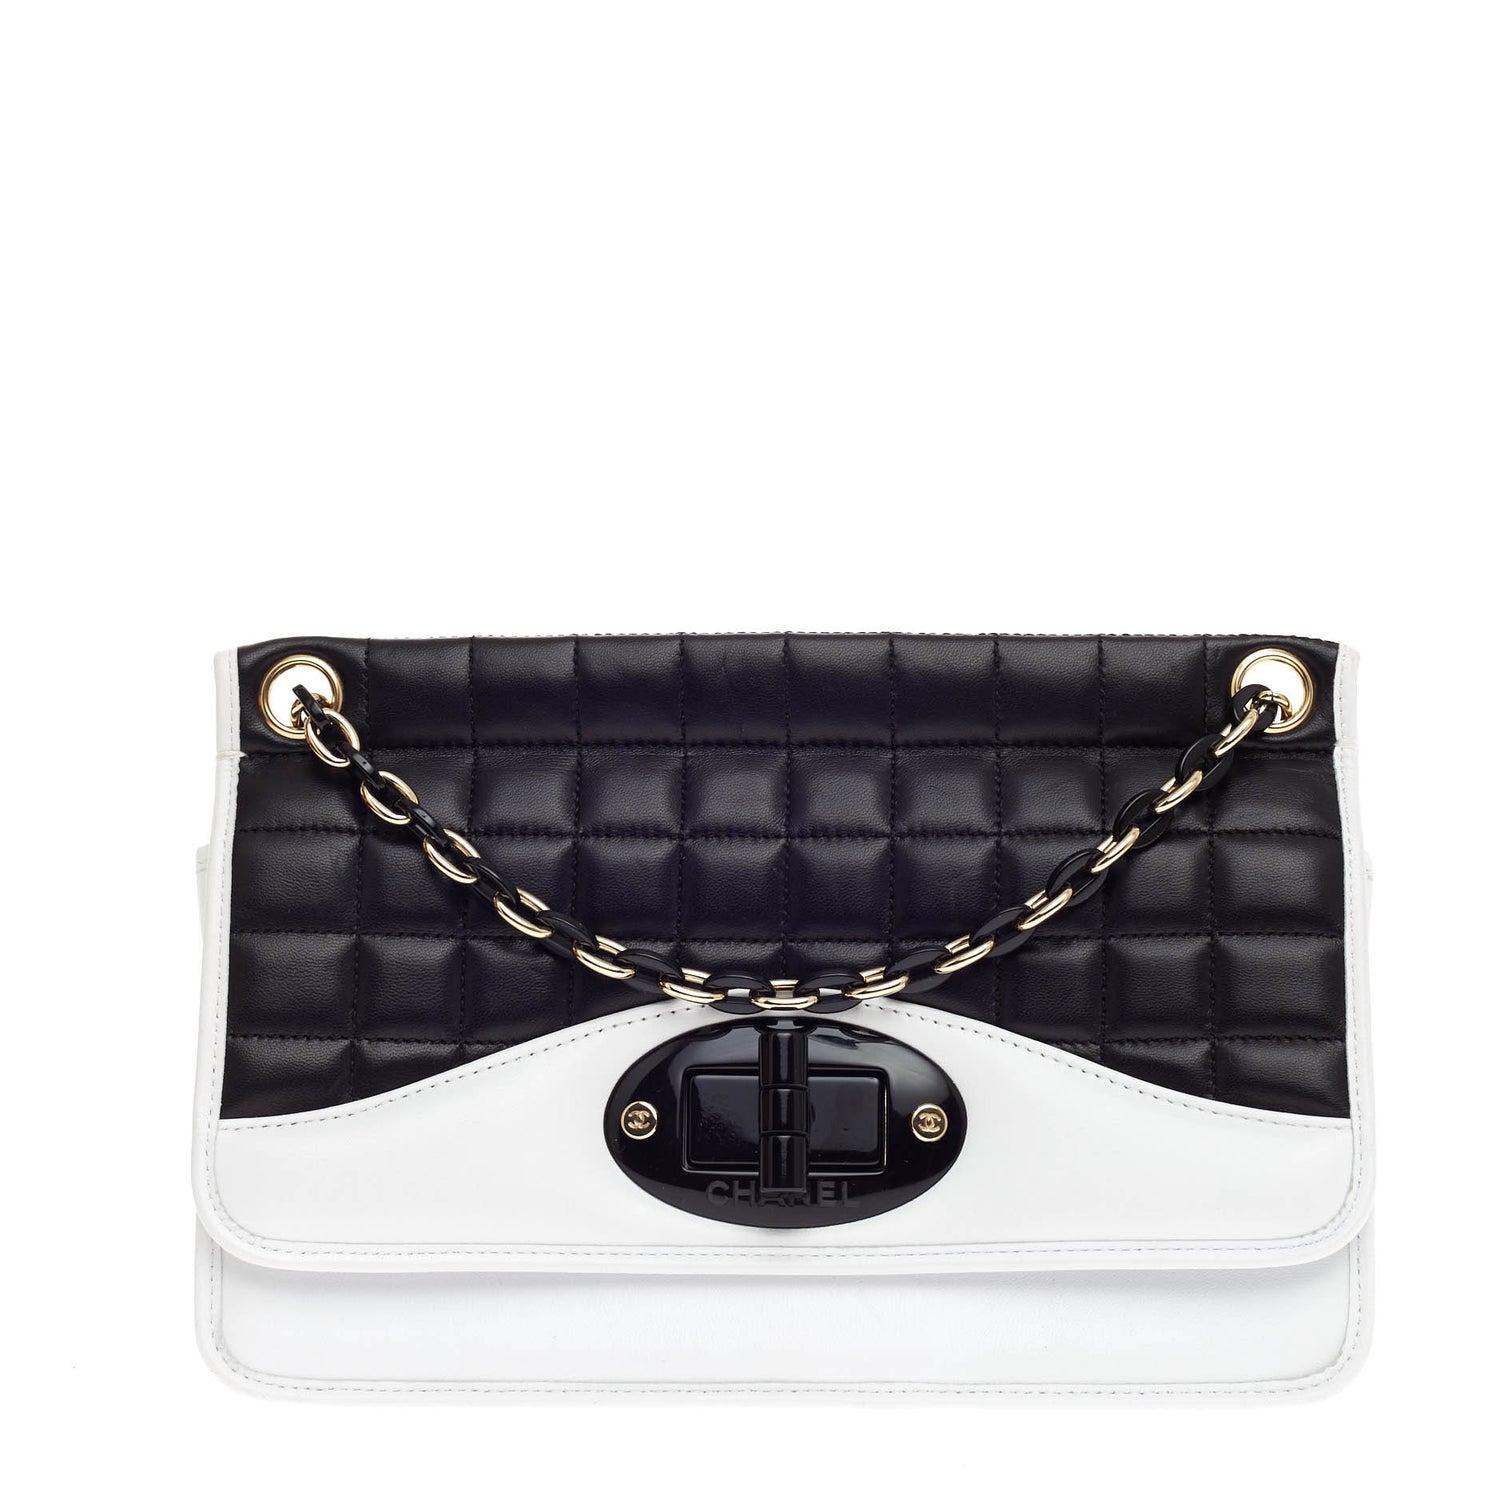 Chanel Classic Flap Two Tone Limited Edition Black & White Lambskin Leather Bag For Sale 1